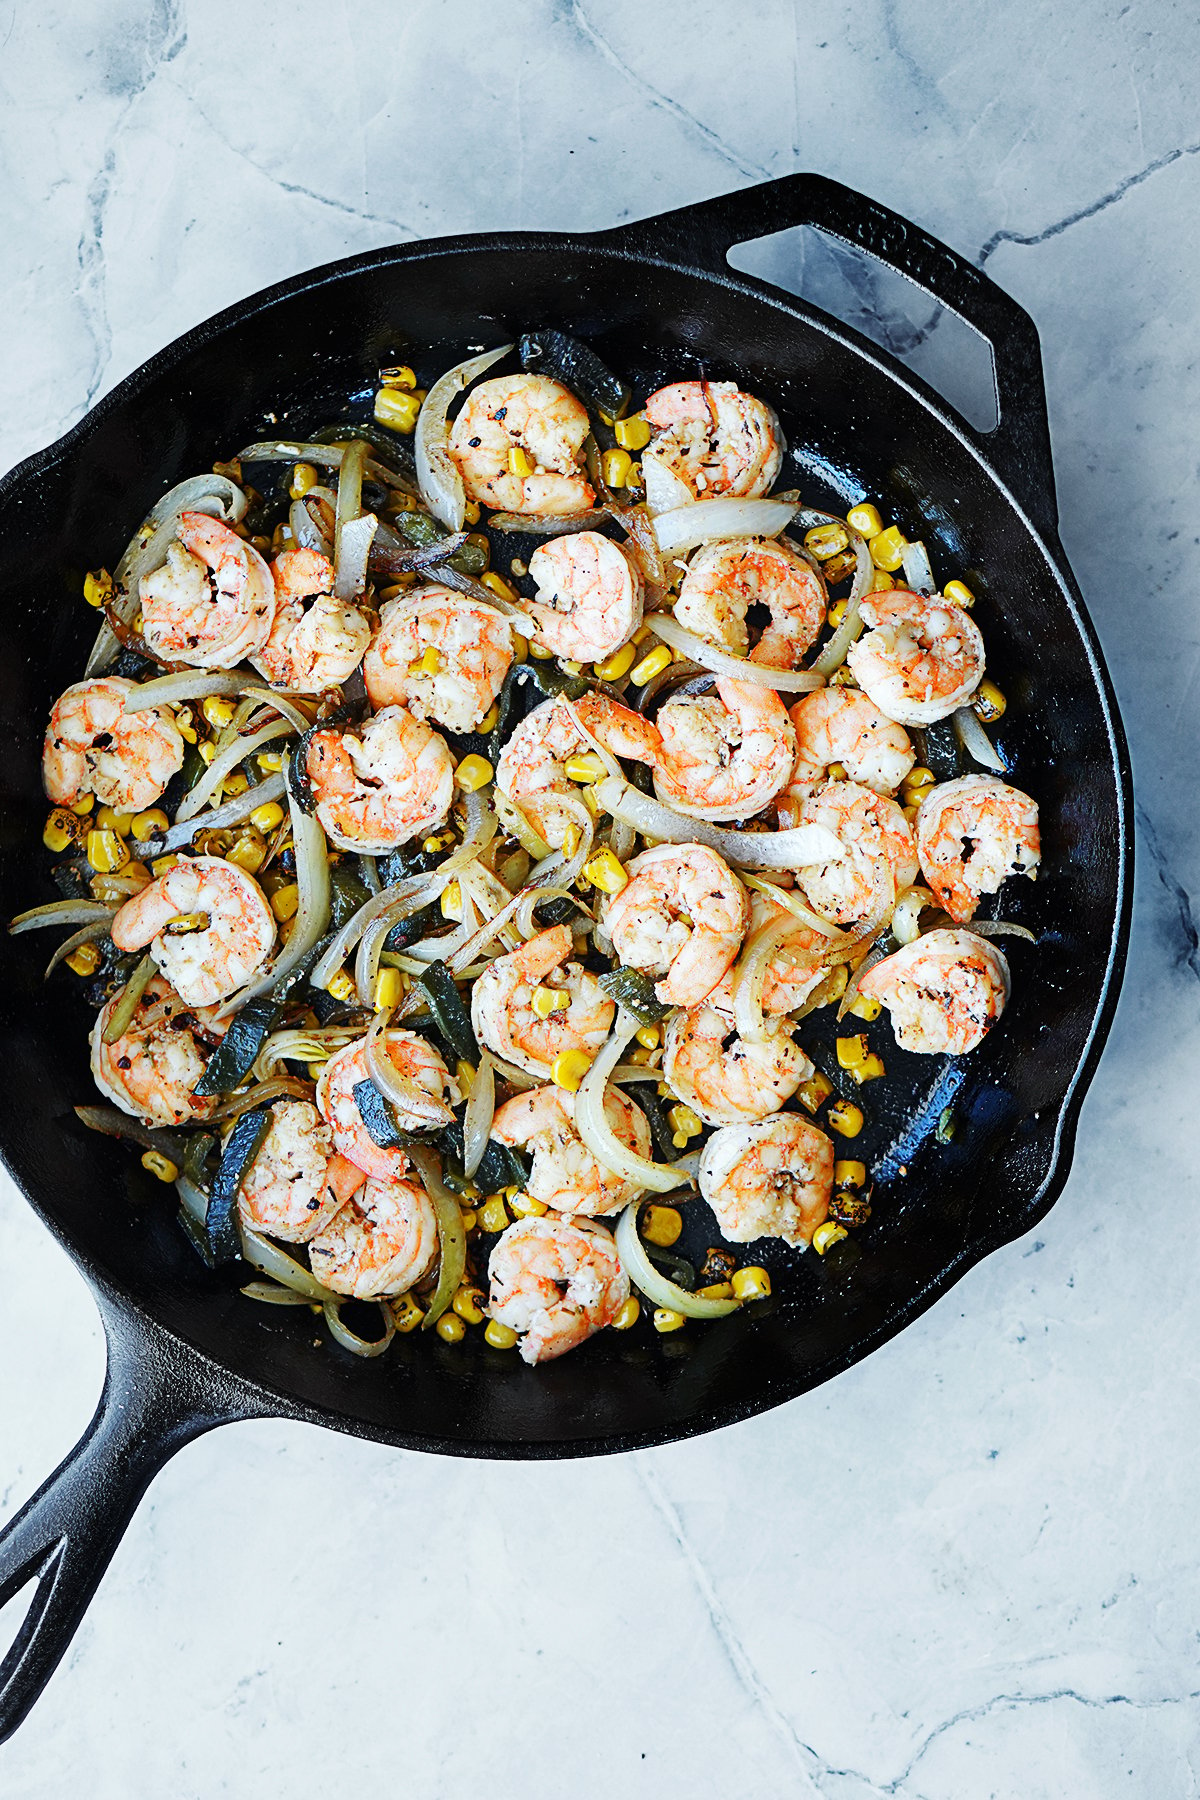 A black skillet with cooked shrimp, onions, corn and poblano peppers